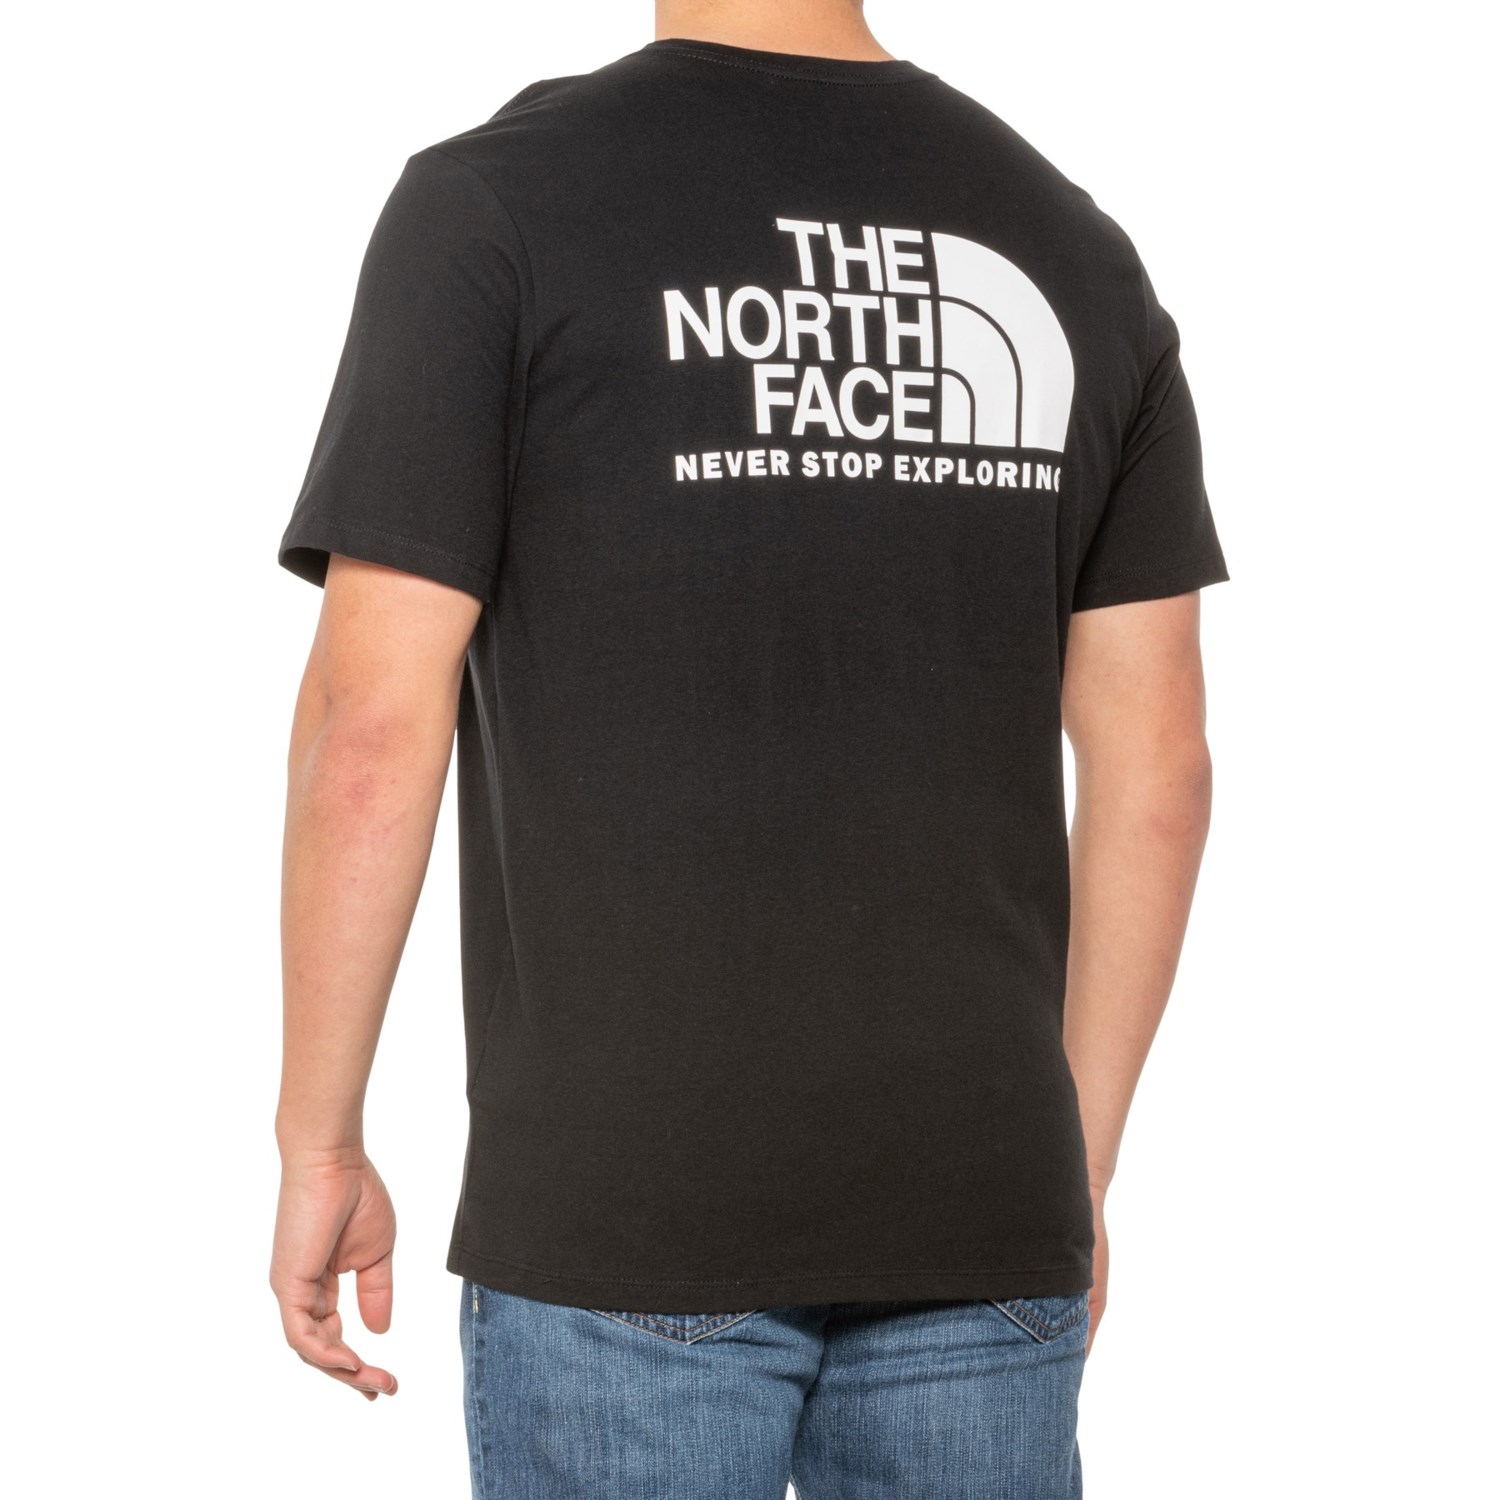 The North Face Throwback T-Shirt - Short Sleeve